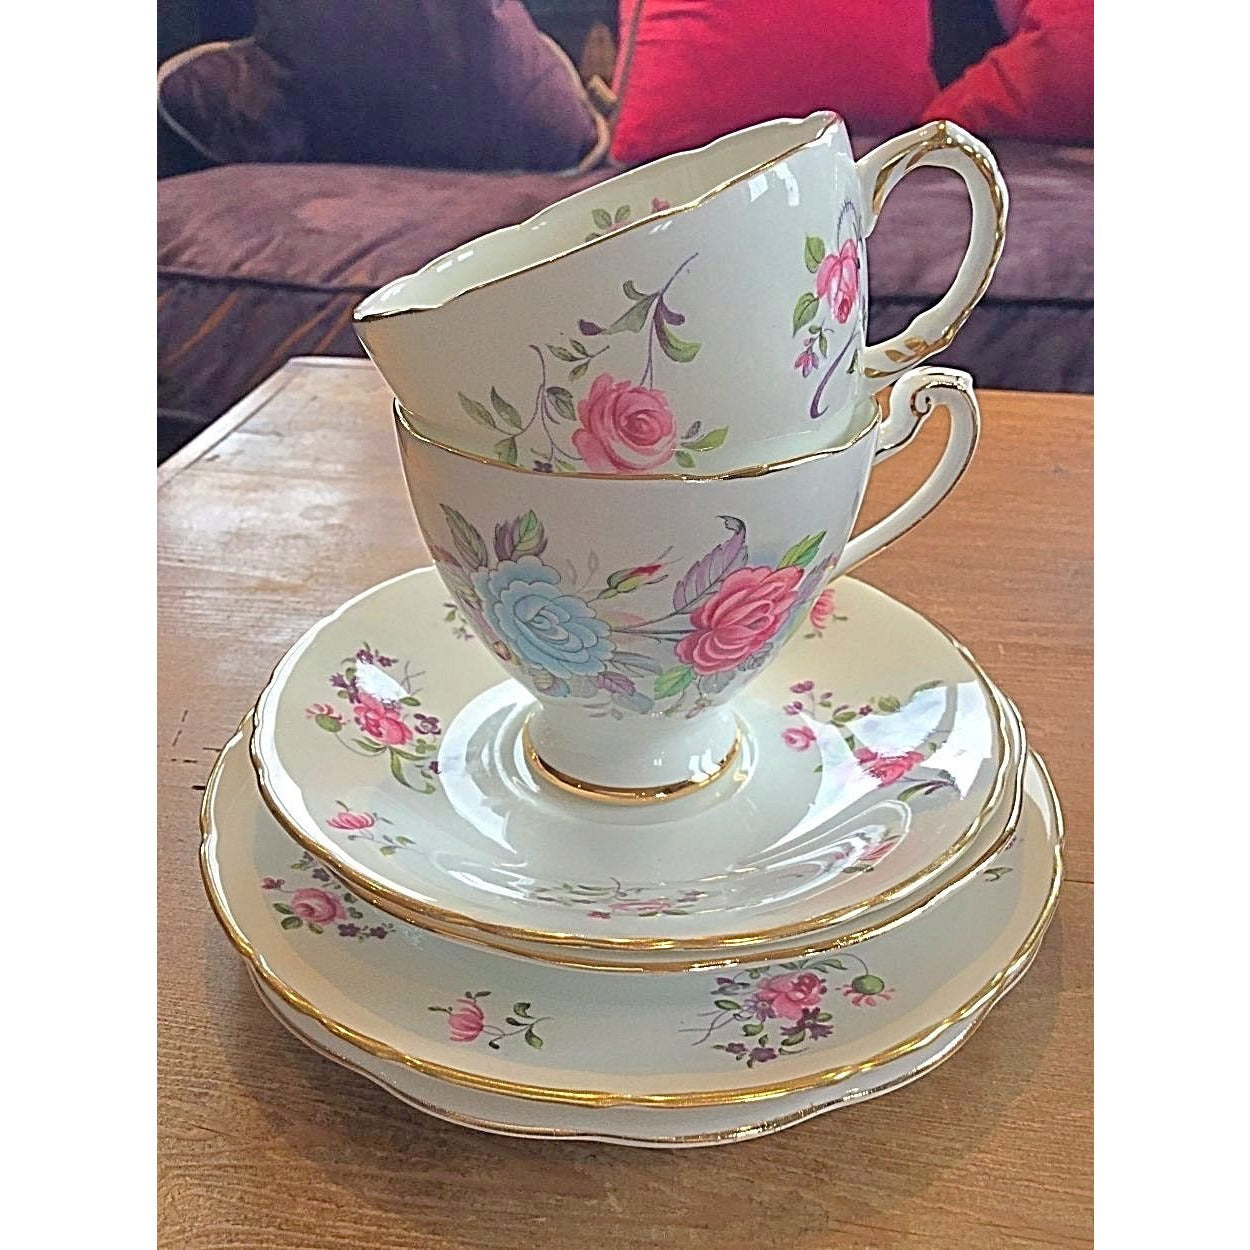 Ribbons and Roses - Vintage Tea set for 2